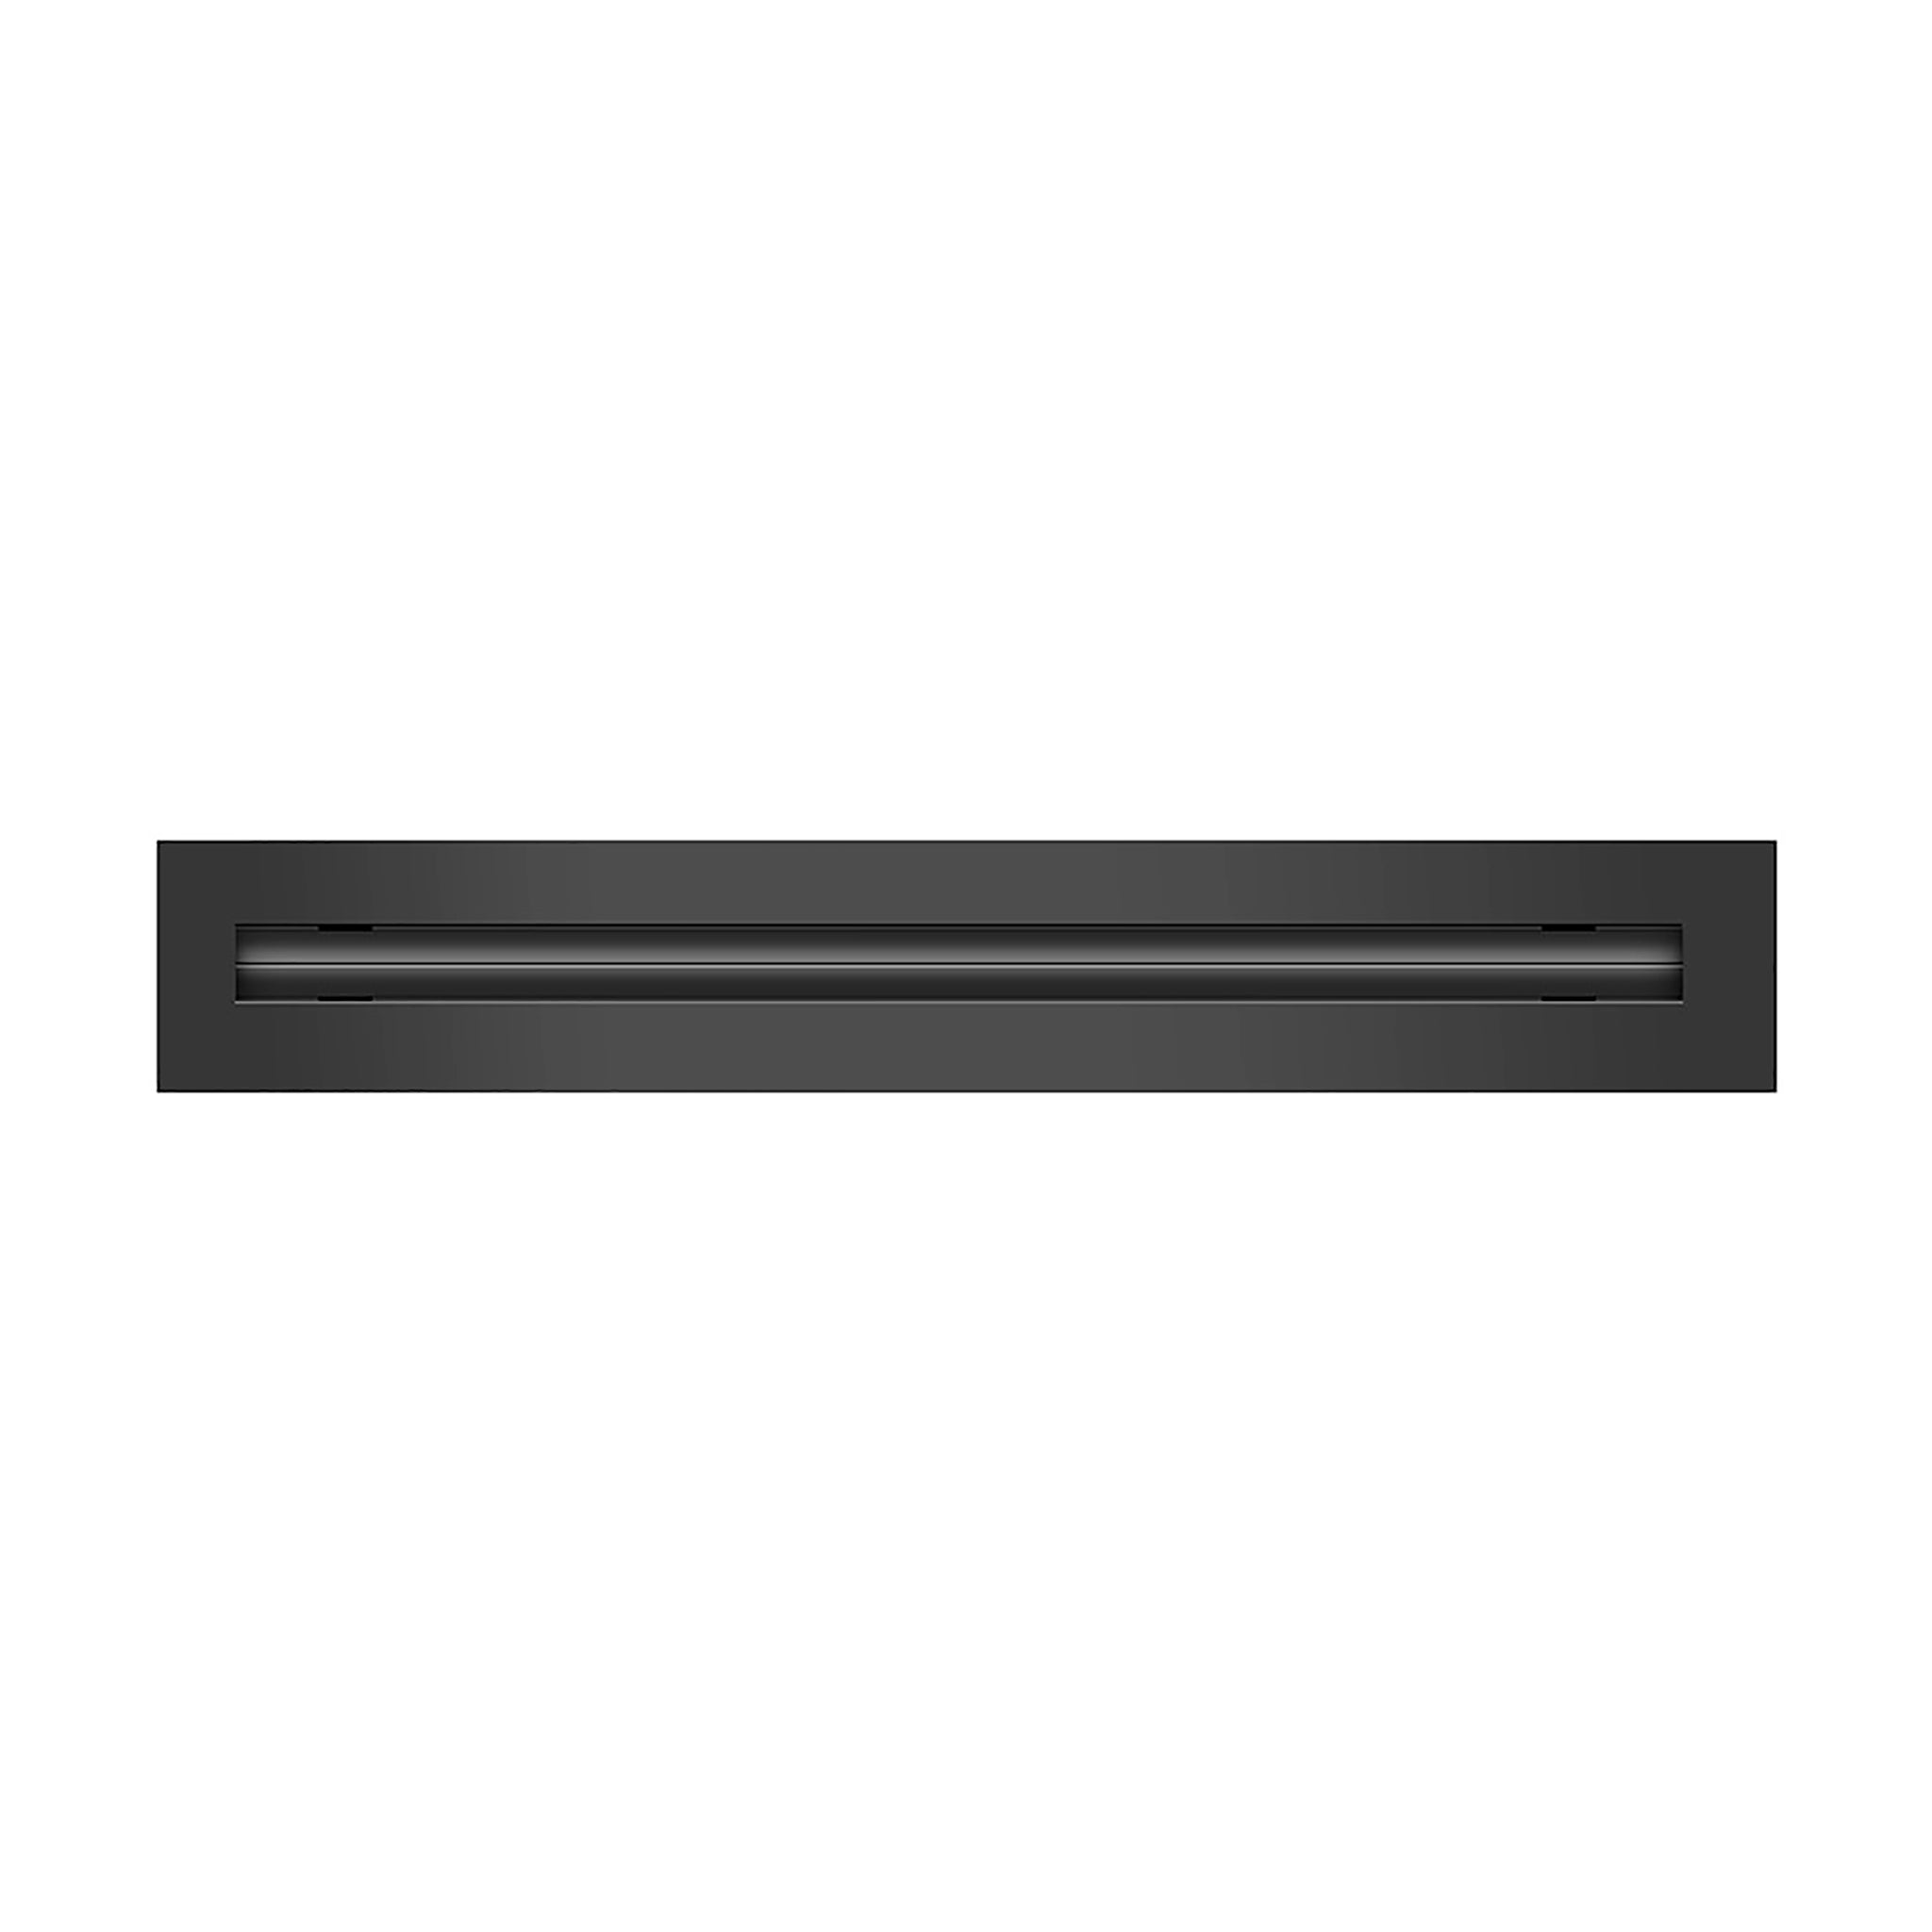 Front of 18 Inch 1 Slot Linear Air Vent Cover Black - 18 Inch 1 Slot Linear Diffuser Black - Texas Buildmart